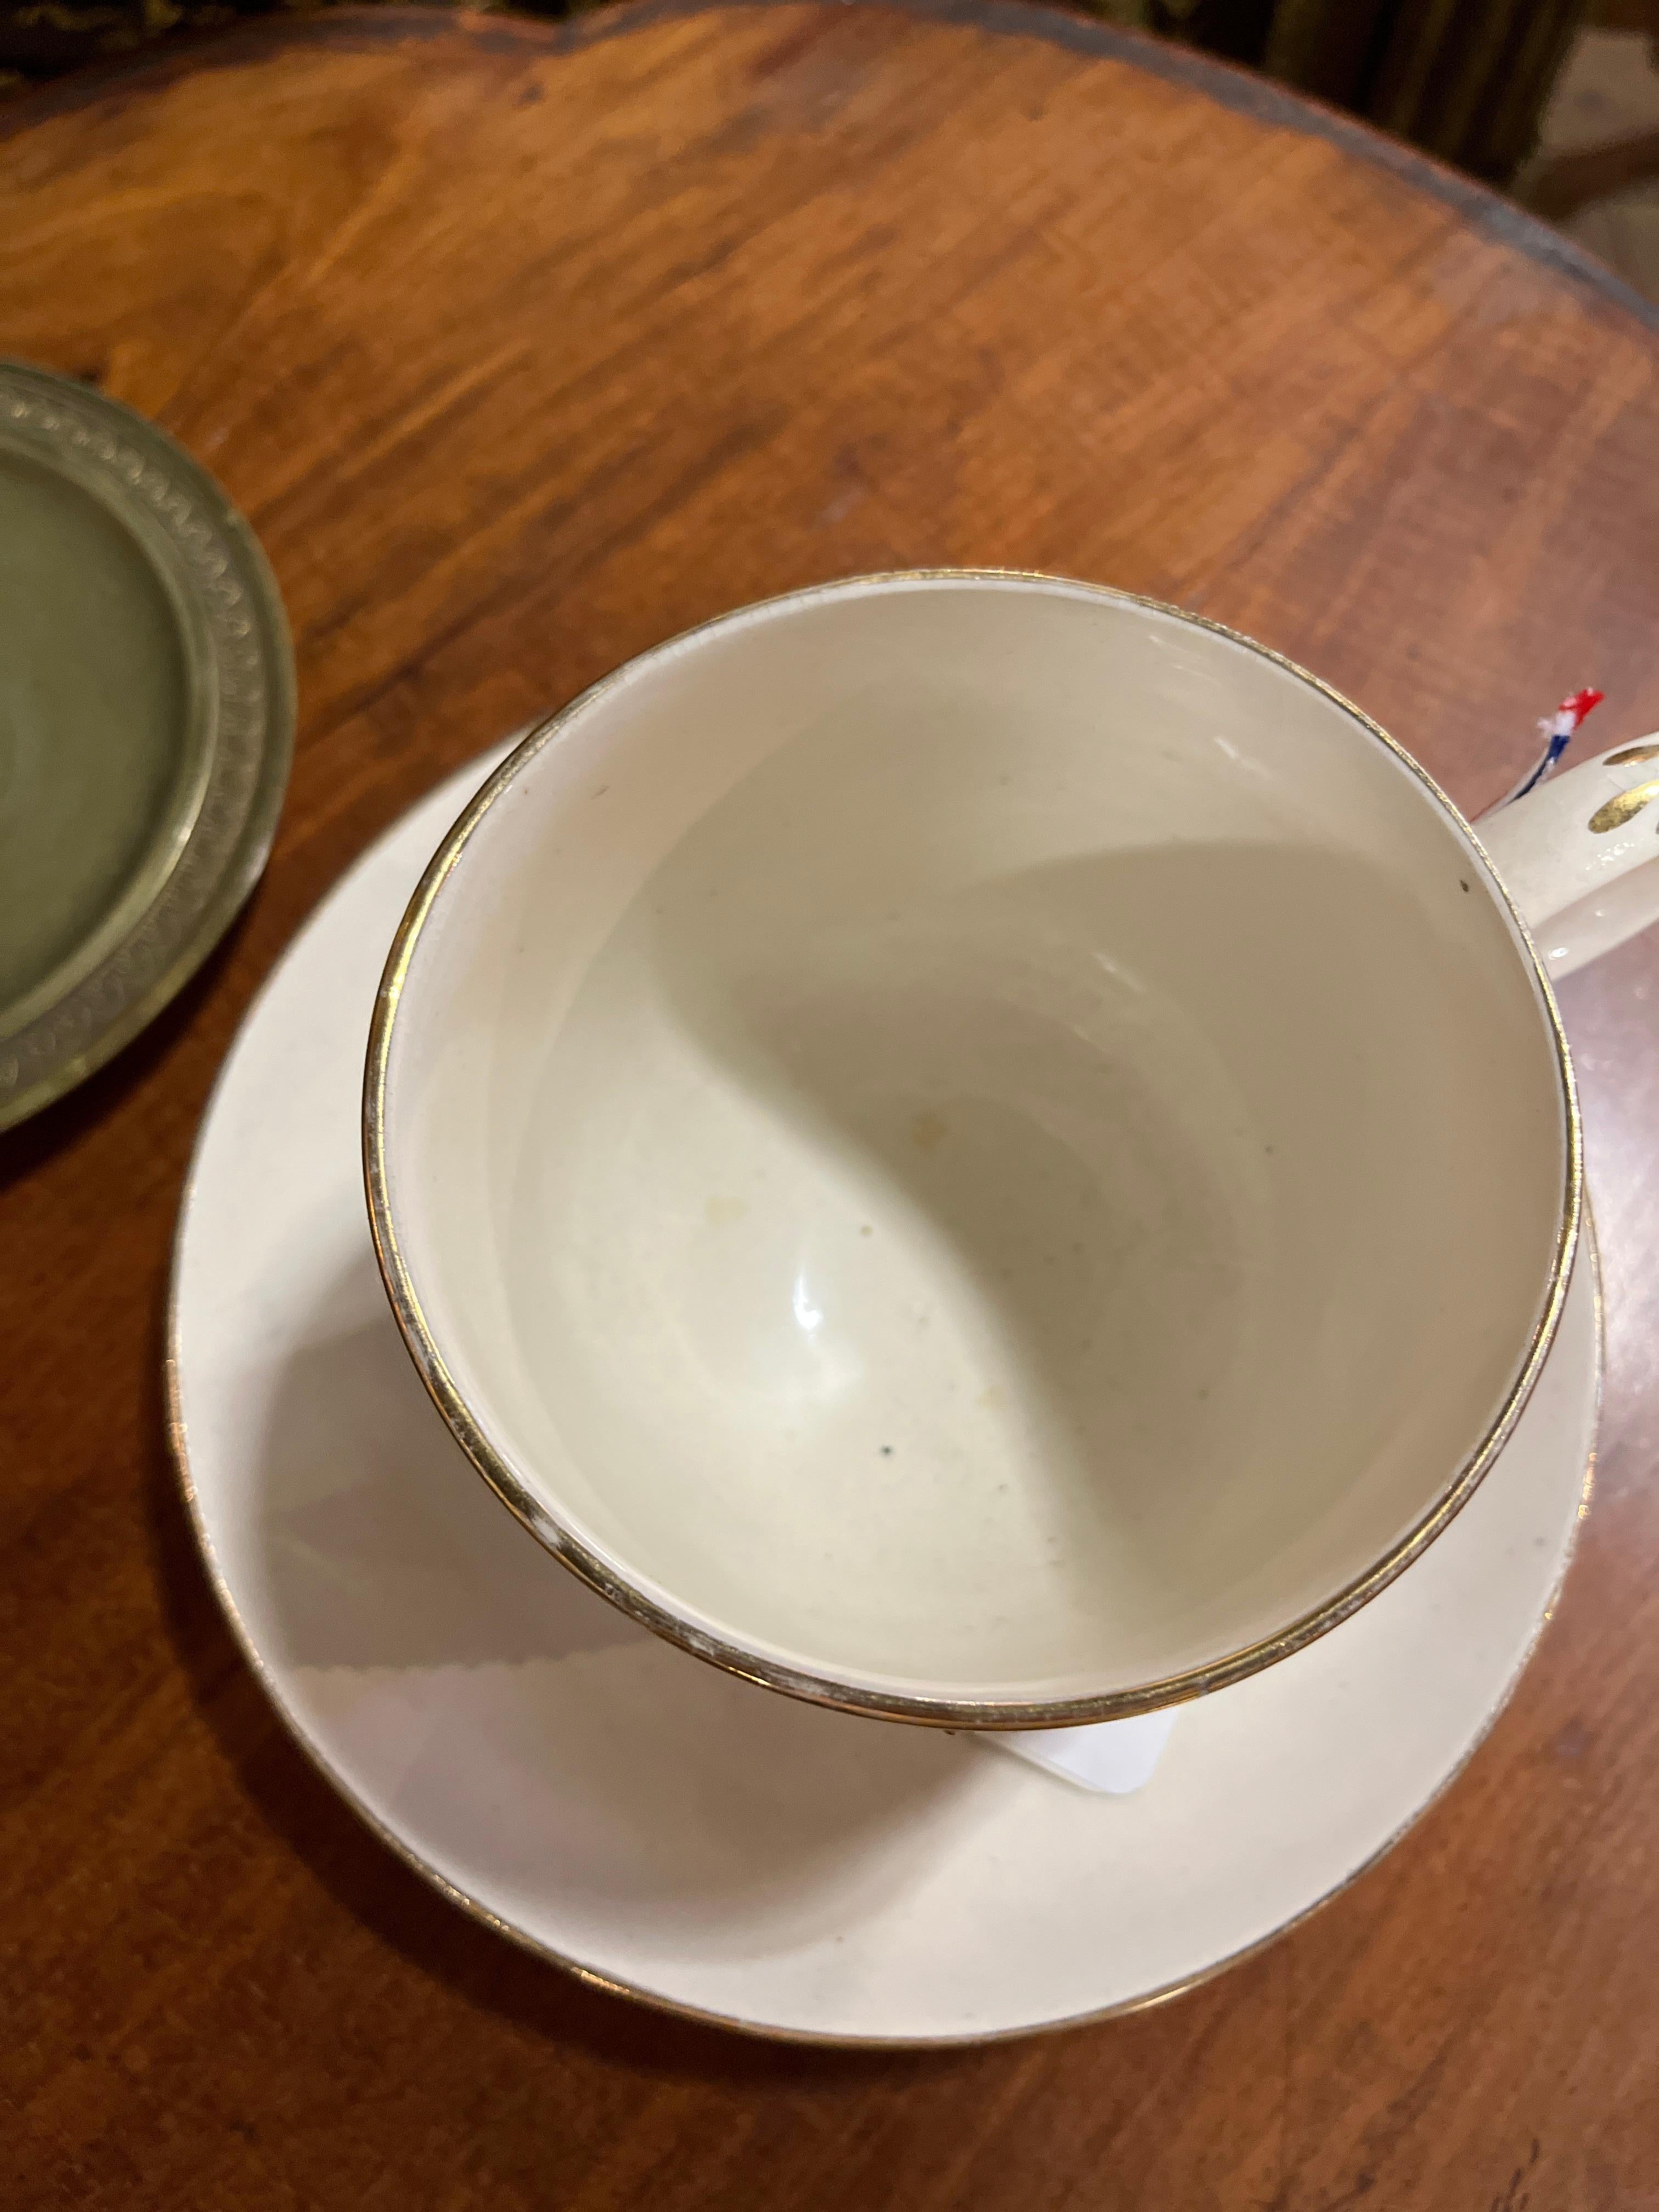 Circa 1897 Queen Victoria's Commemorative Large Cup & Saucer  In Good Condition For Sale In Scottsdale, AZ